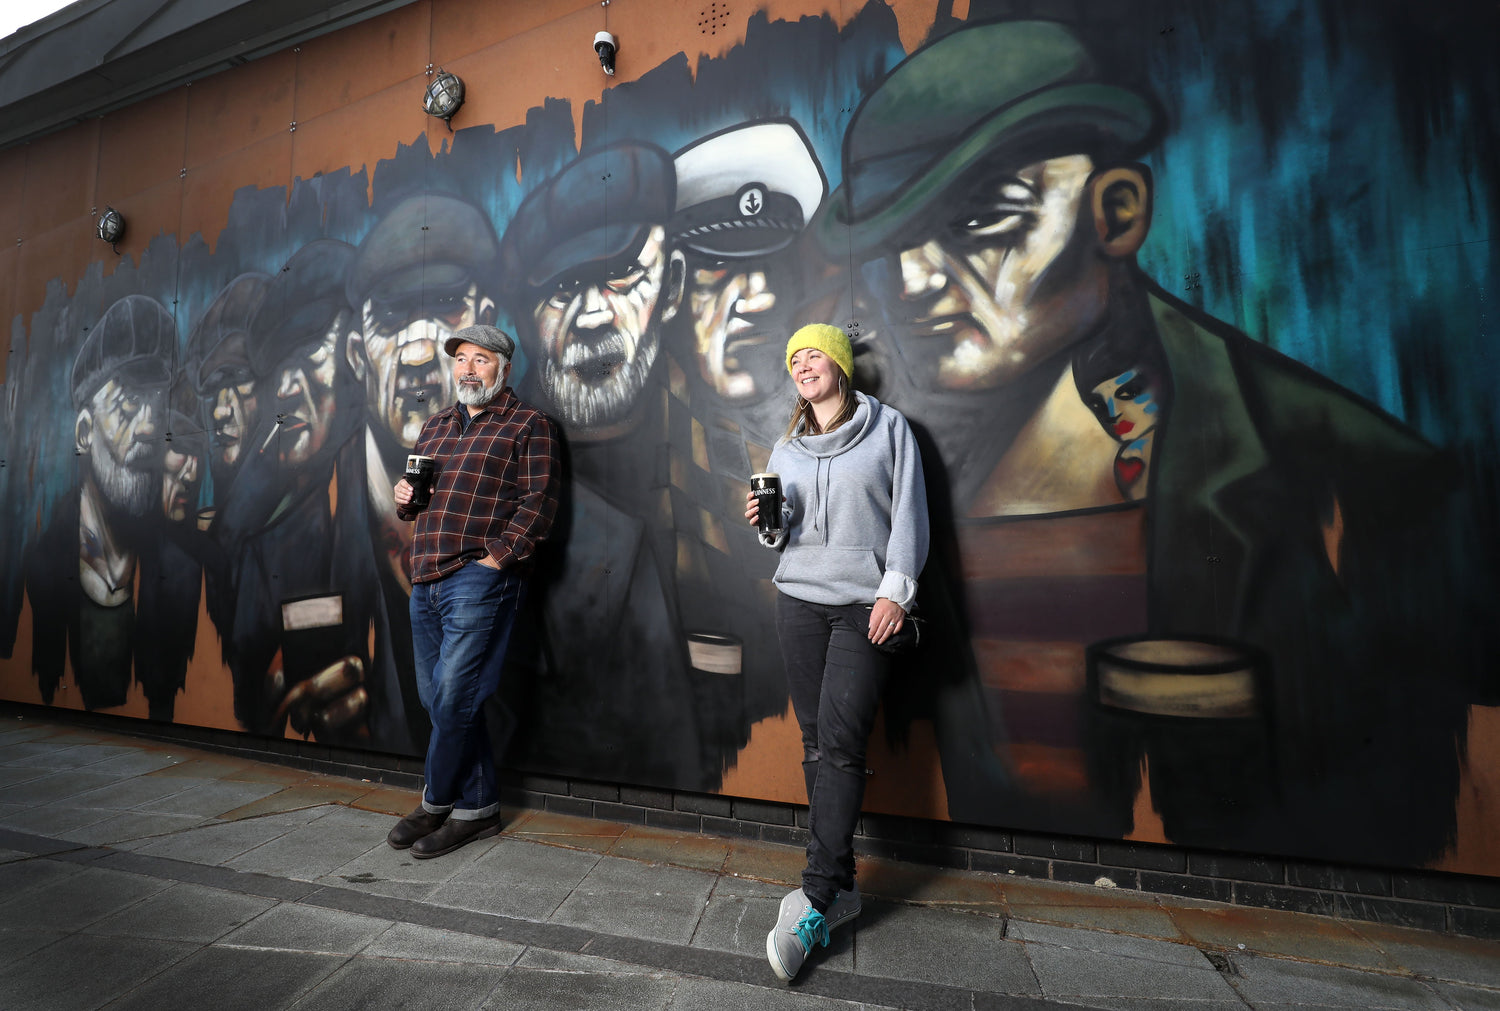 New Terry Bradley and Friz mural unveiled